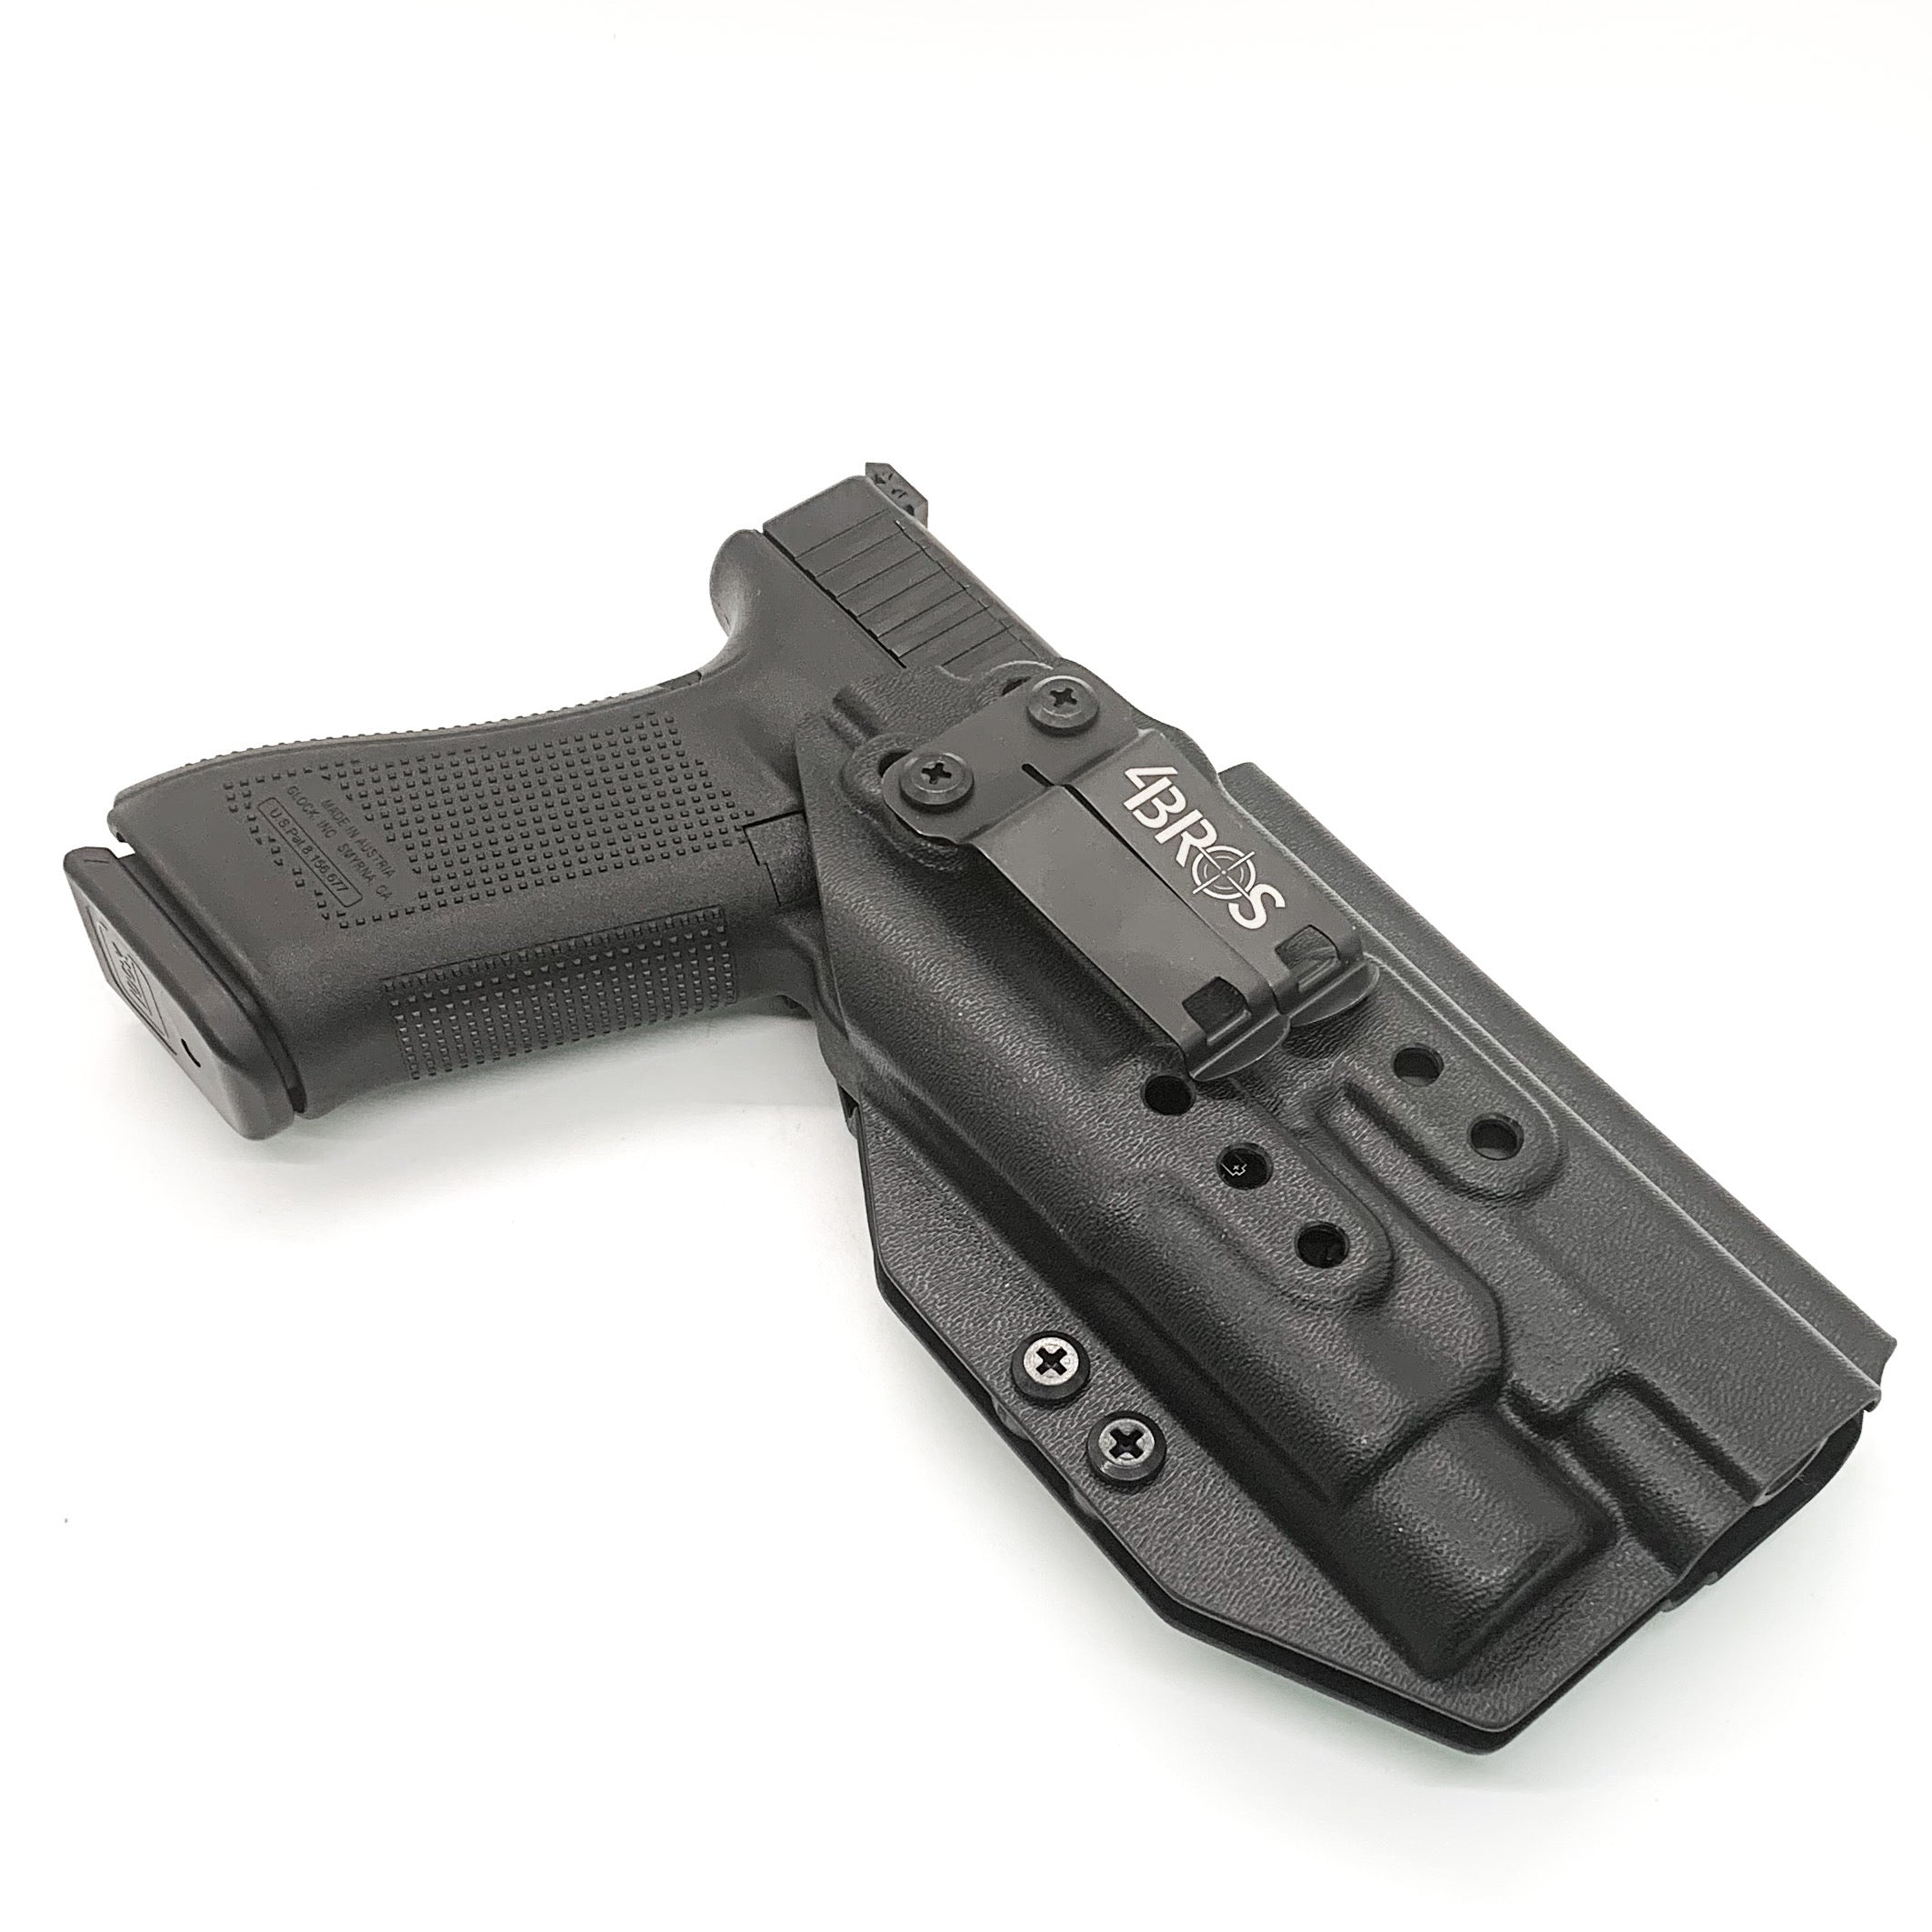 For the best Inside Waistband Taco Style Kydex Holster designed to fit the Glock 17, 34, and 47 Gen 5 pistols with the Streamlight TLR-1 HL, shop Four Brothers Holsters. Gen 4 Glock 17 and 22 and TLR1 HL. Full sweat guard, adjustable retention. Made in USA Open muzzle for threaded barrels, cleared for red dot sights